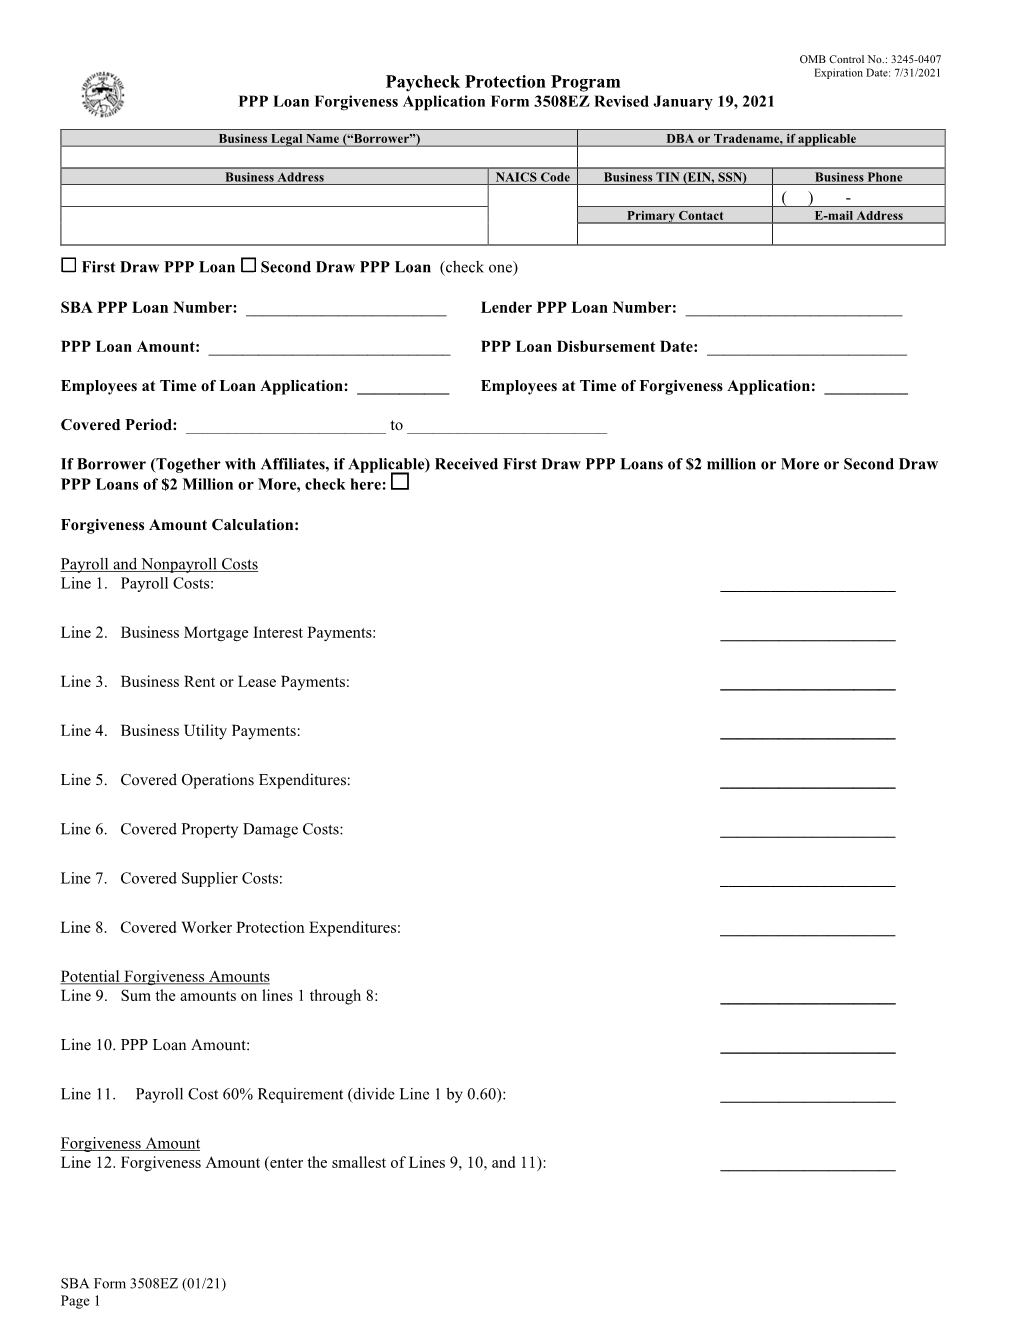 Paycheck Protection Program: PPP Loan Forgiveness Application Form 3508EZ Revised January 19, 2021